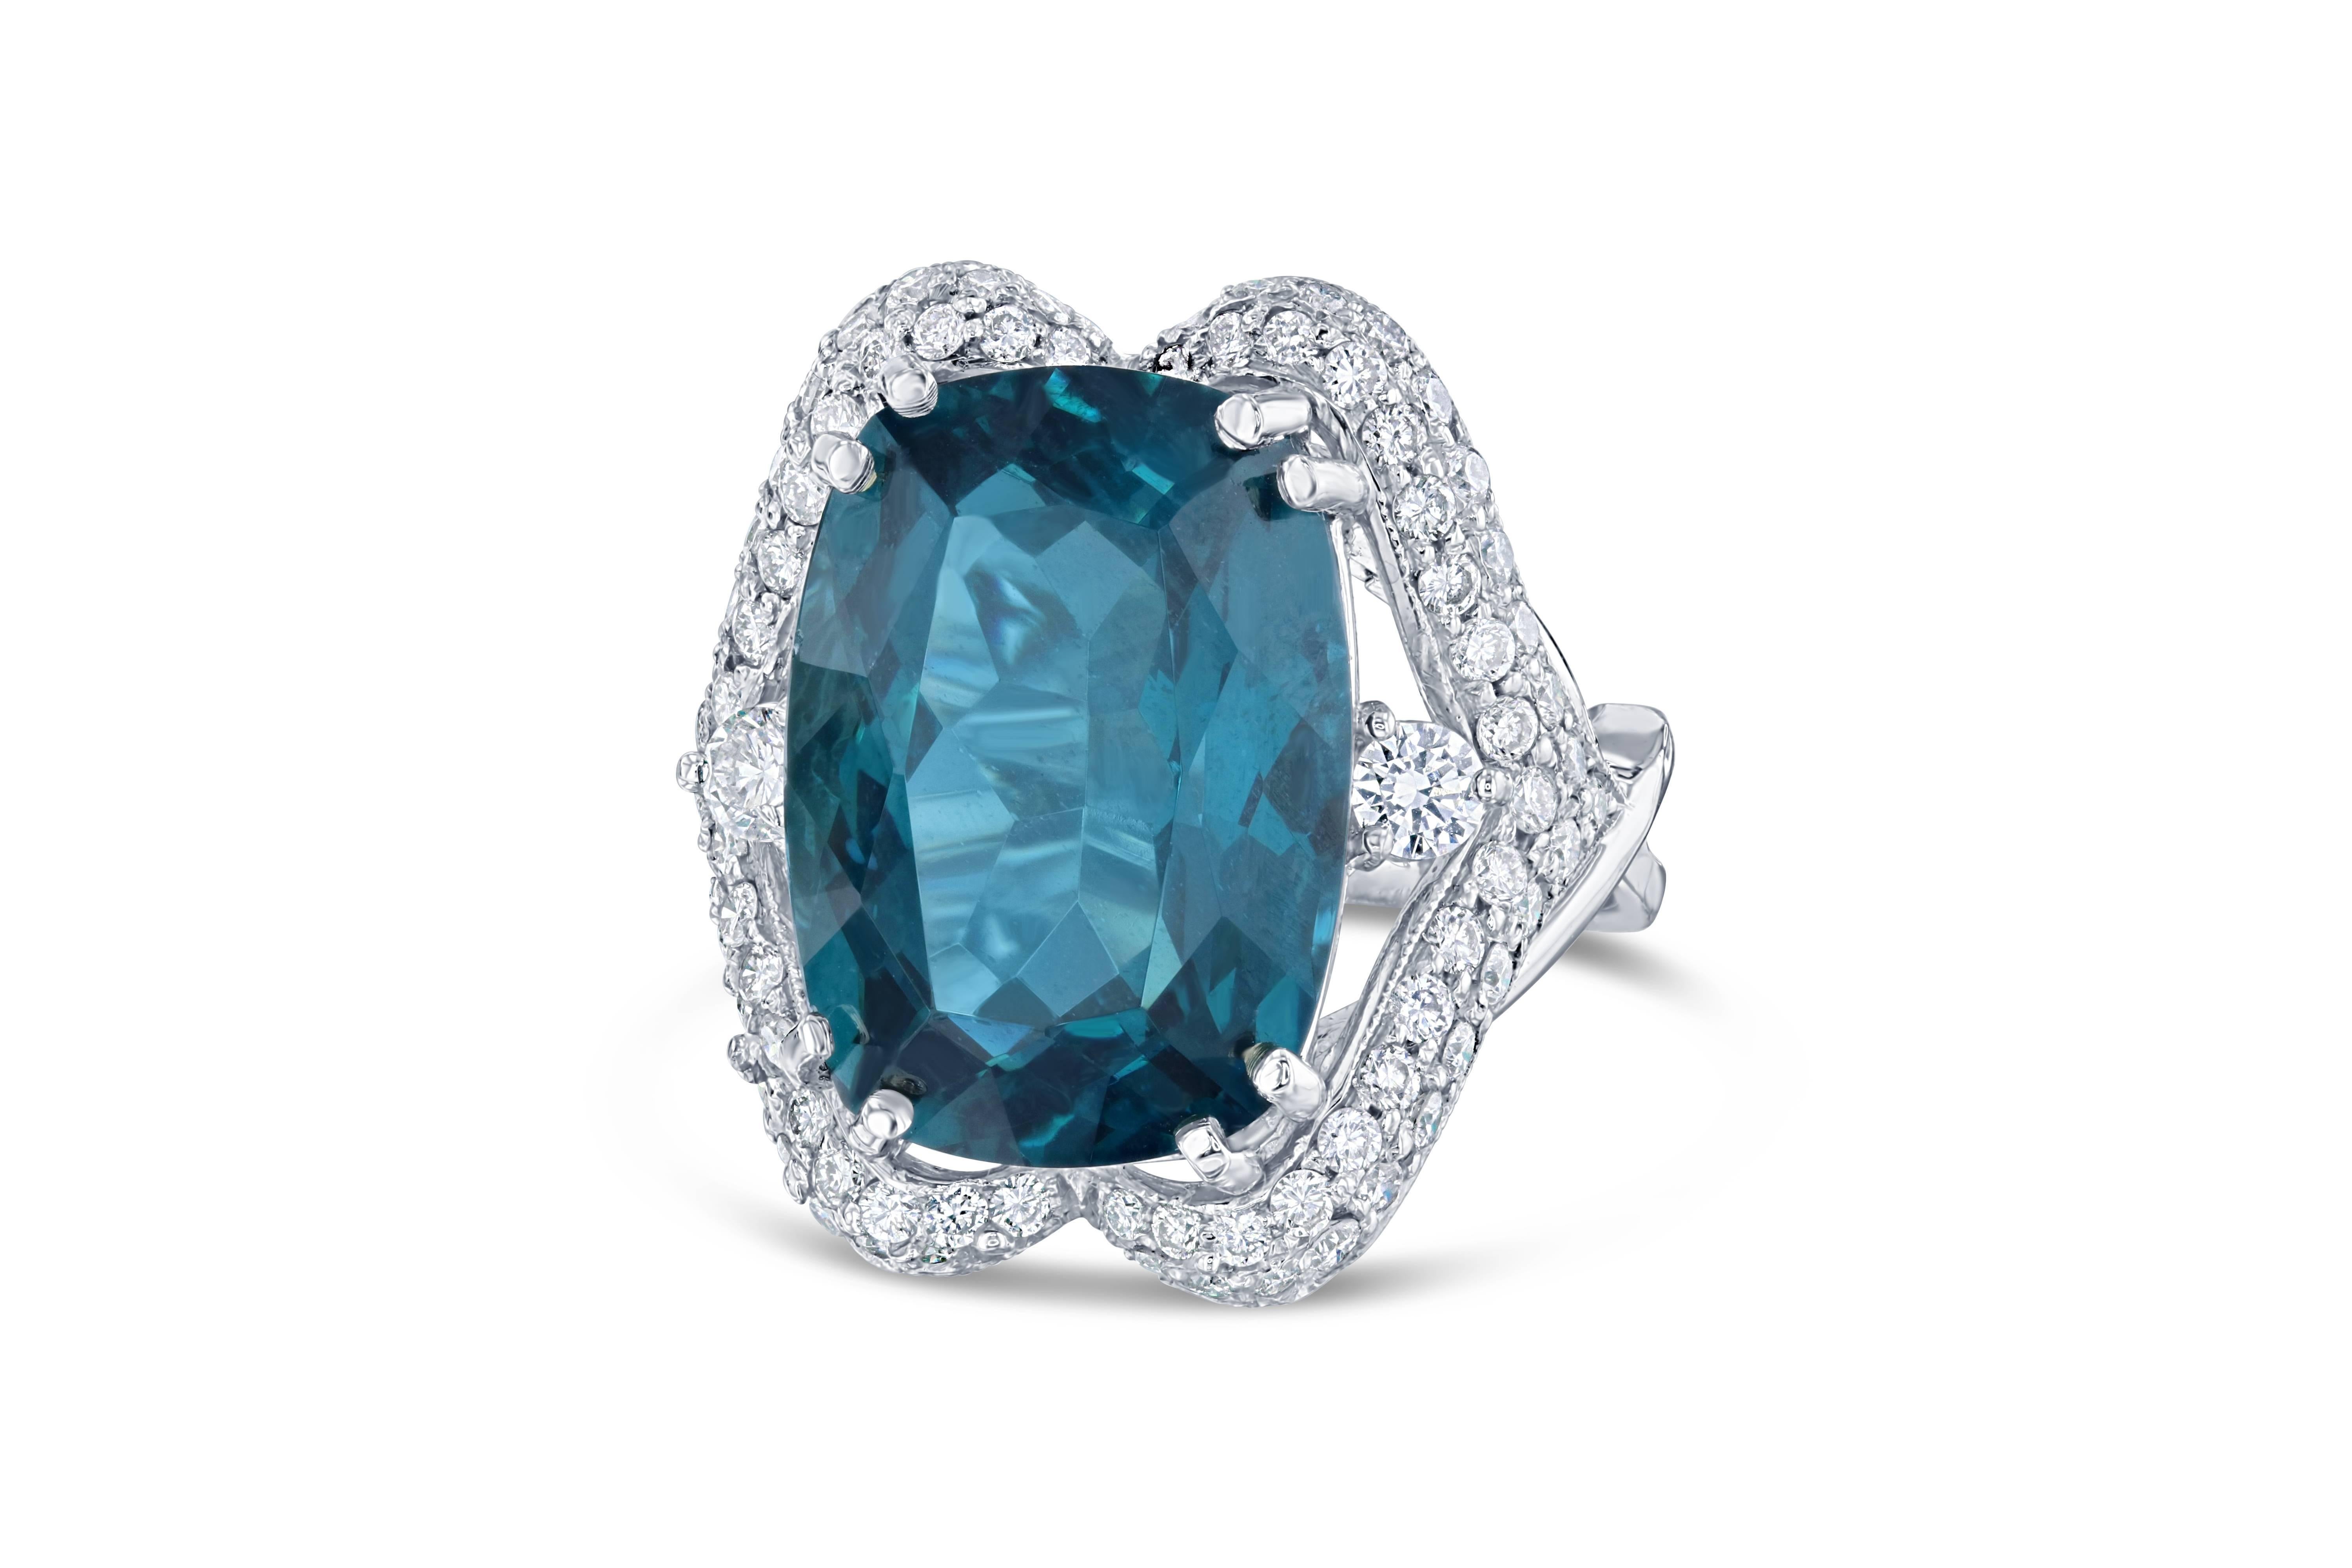 This ring has a large and gorgeous 15.26 carat Apatite in the center of the ring and is surrounded by 81 Round Cut Diamonds that weigh 1.30 carats Clarity: VS2, Color: F.  The total carat weight of the ring is 16.56 carats.  The ring is made in 18K